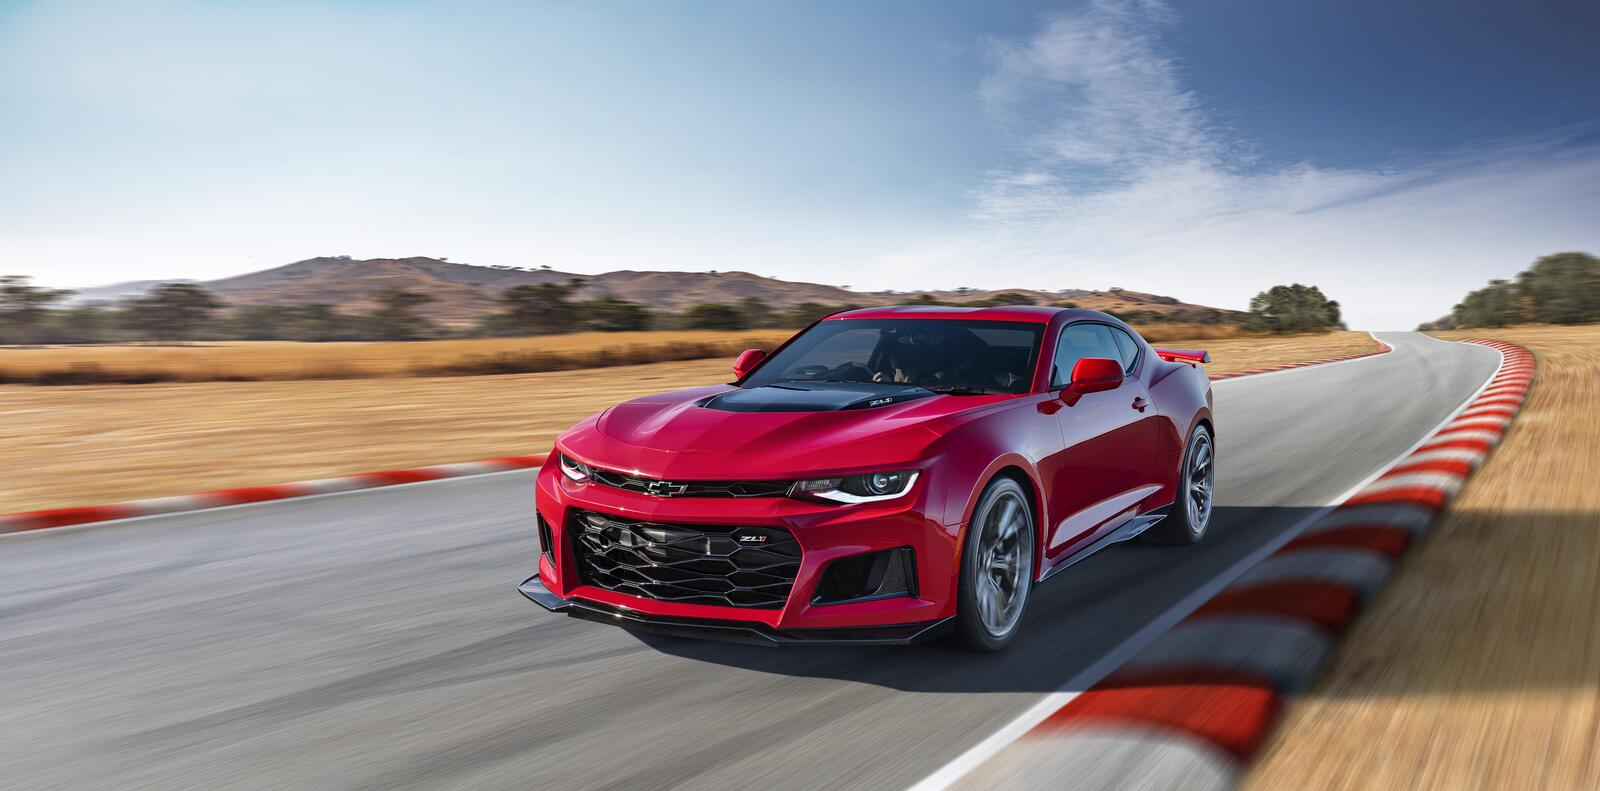 Wallpapers Chevrolet Camaro Zl1 muscle cars racing track on the desktop